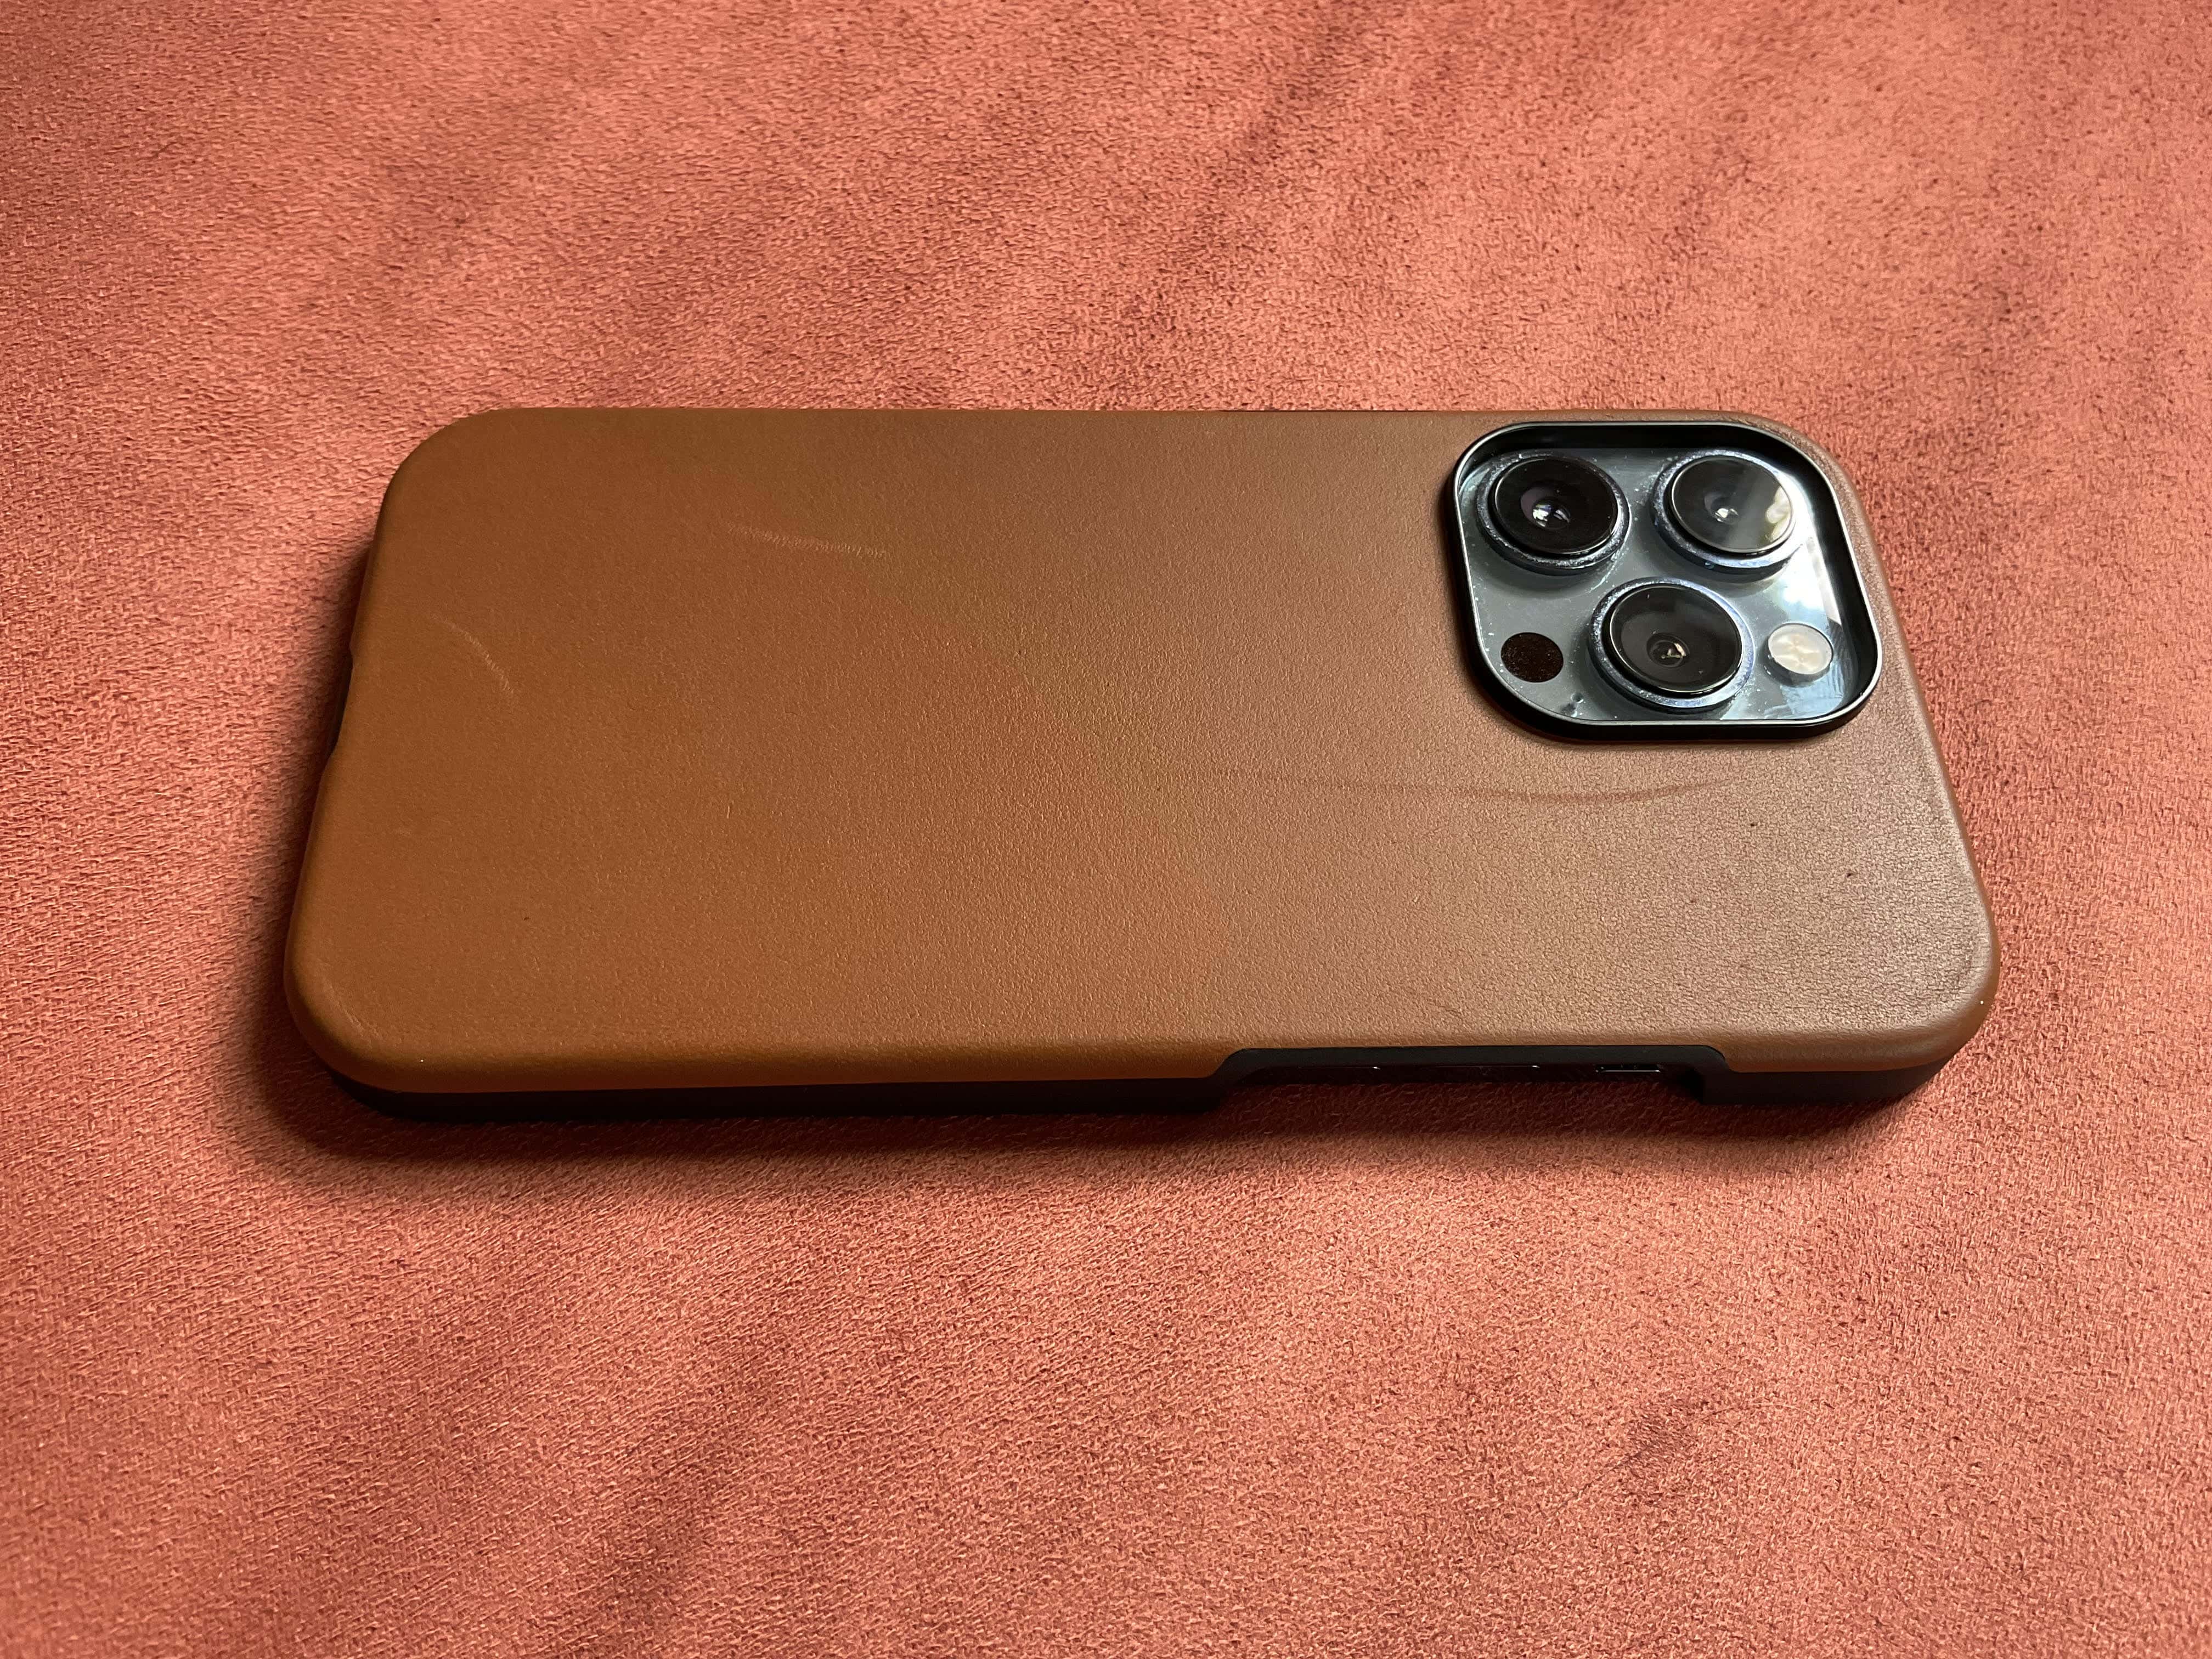 Journey's protective iPhone 13 leather case feels just right [Review]